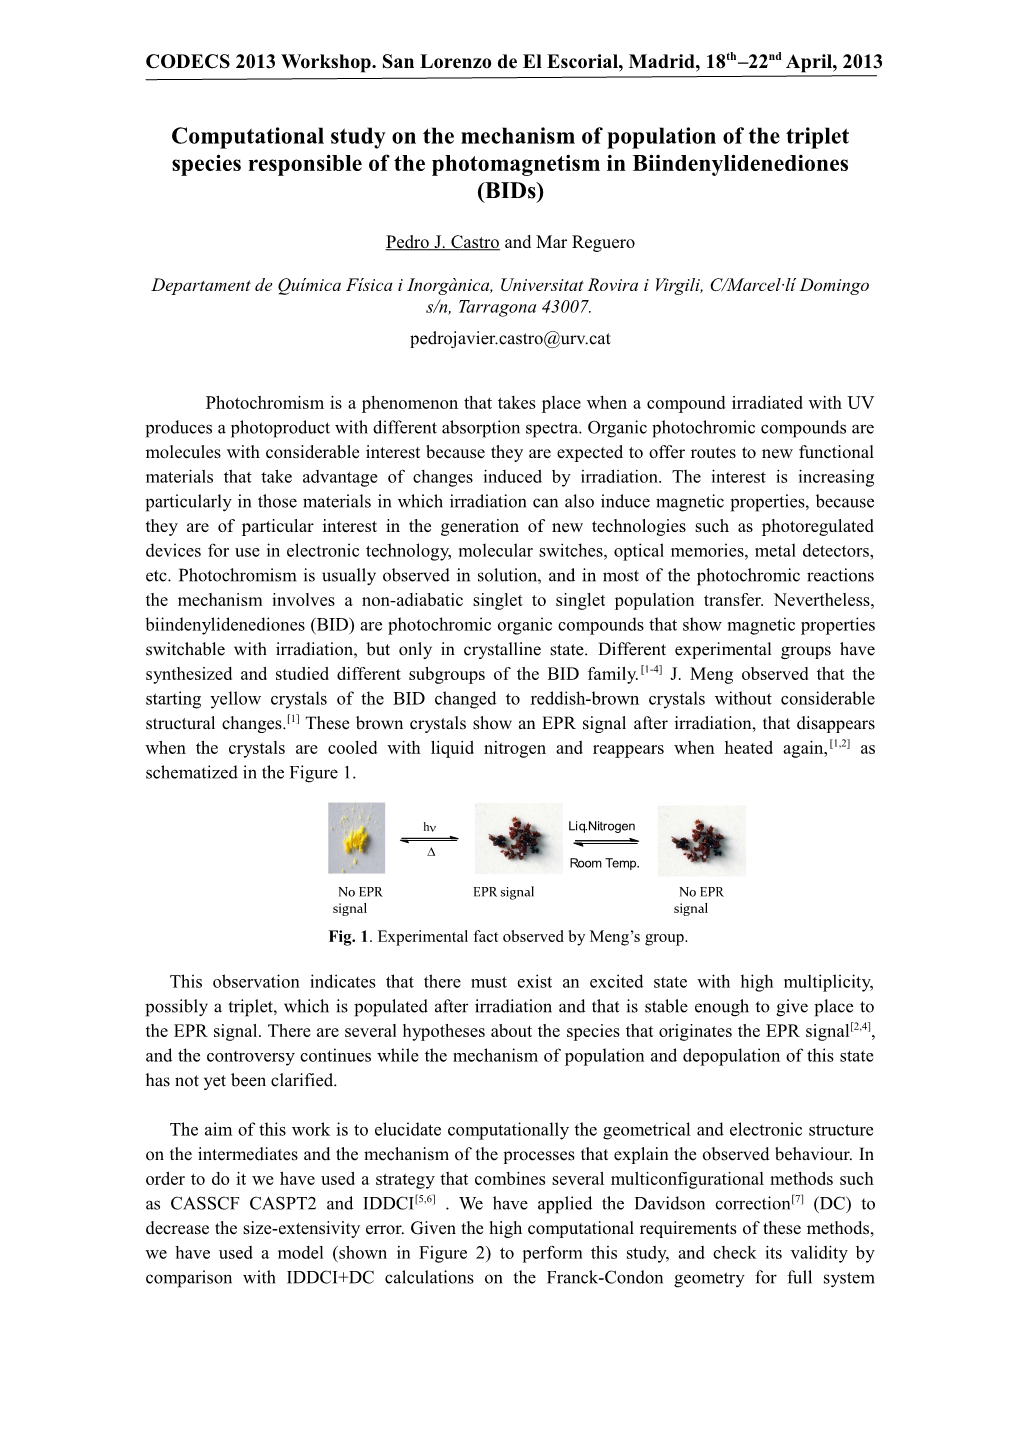 Computational Study of the Photochromism and Photomagnetism of Biindenylidenediones (Bids)